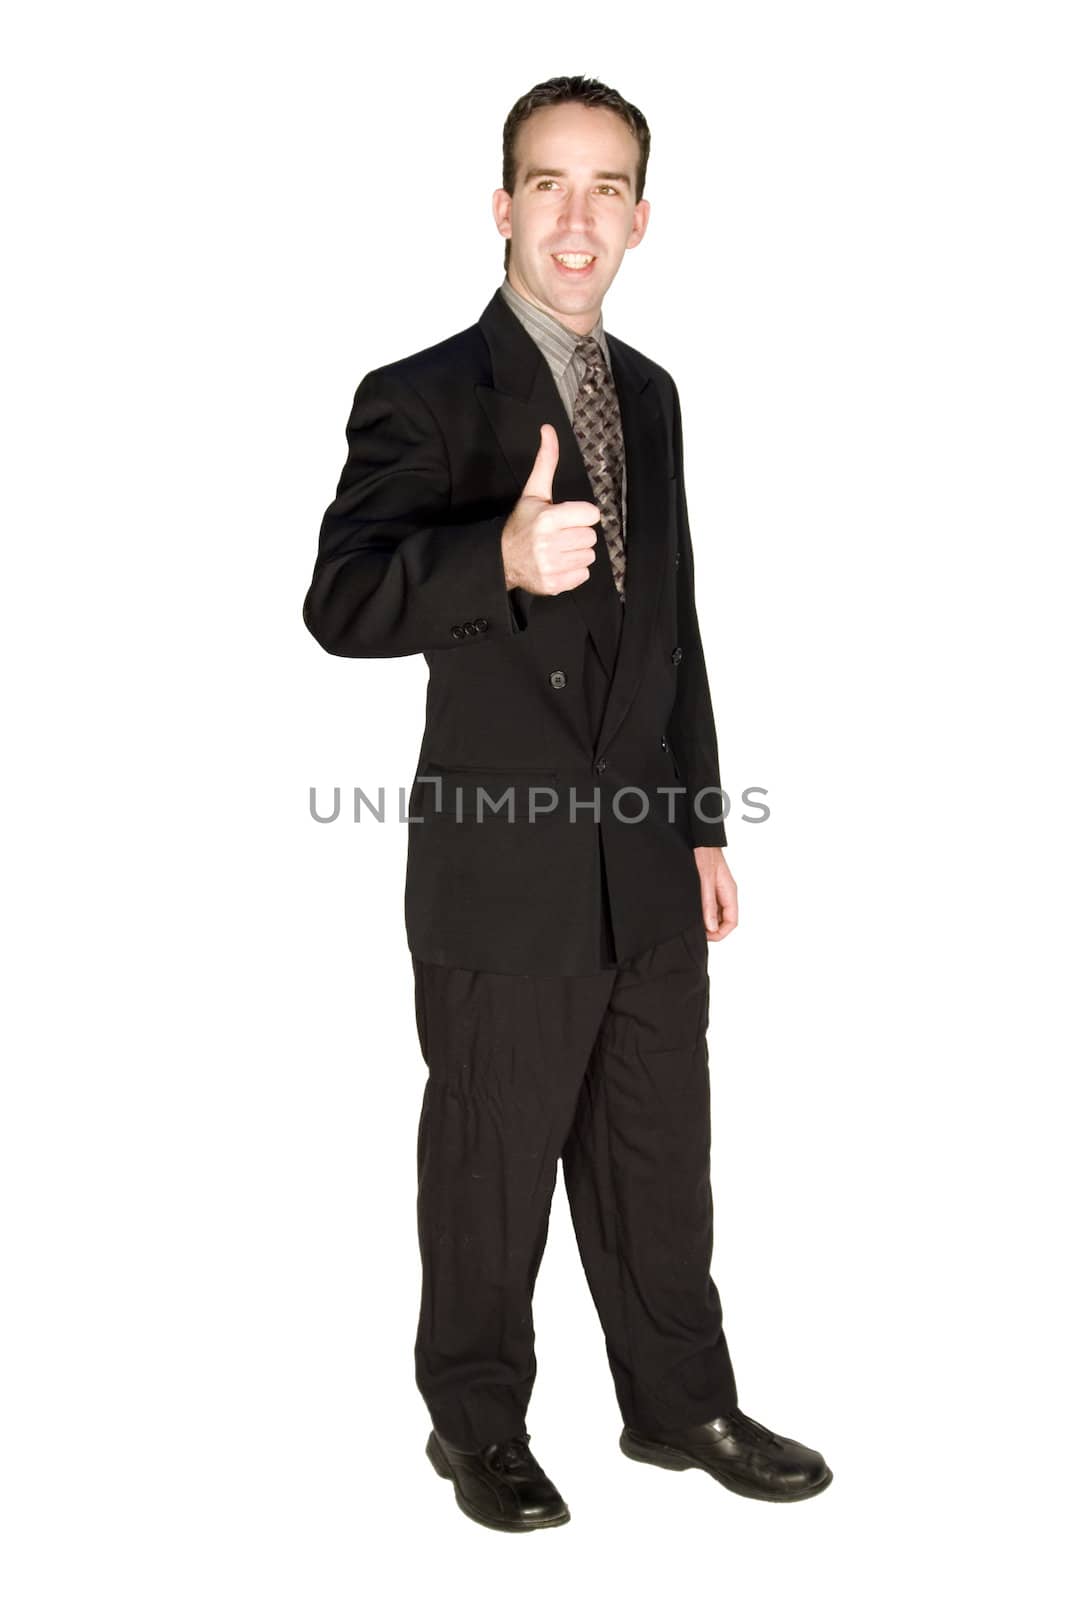 Young good looking businessman gives a thumbs up in response to a promotion